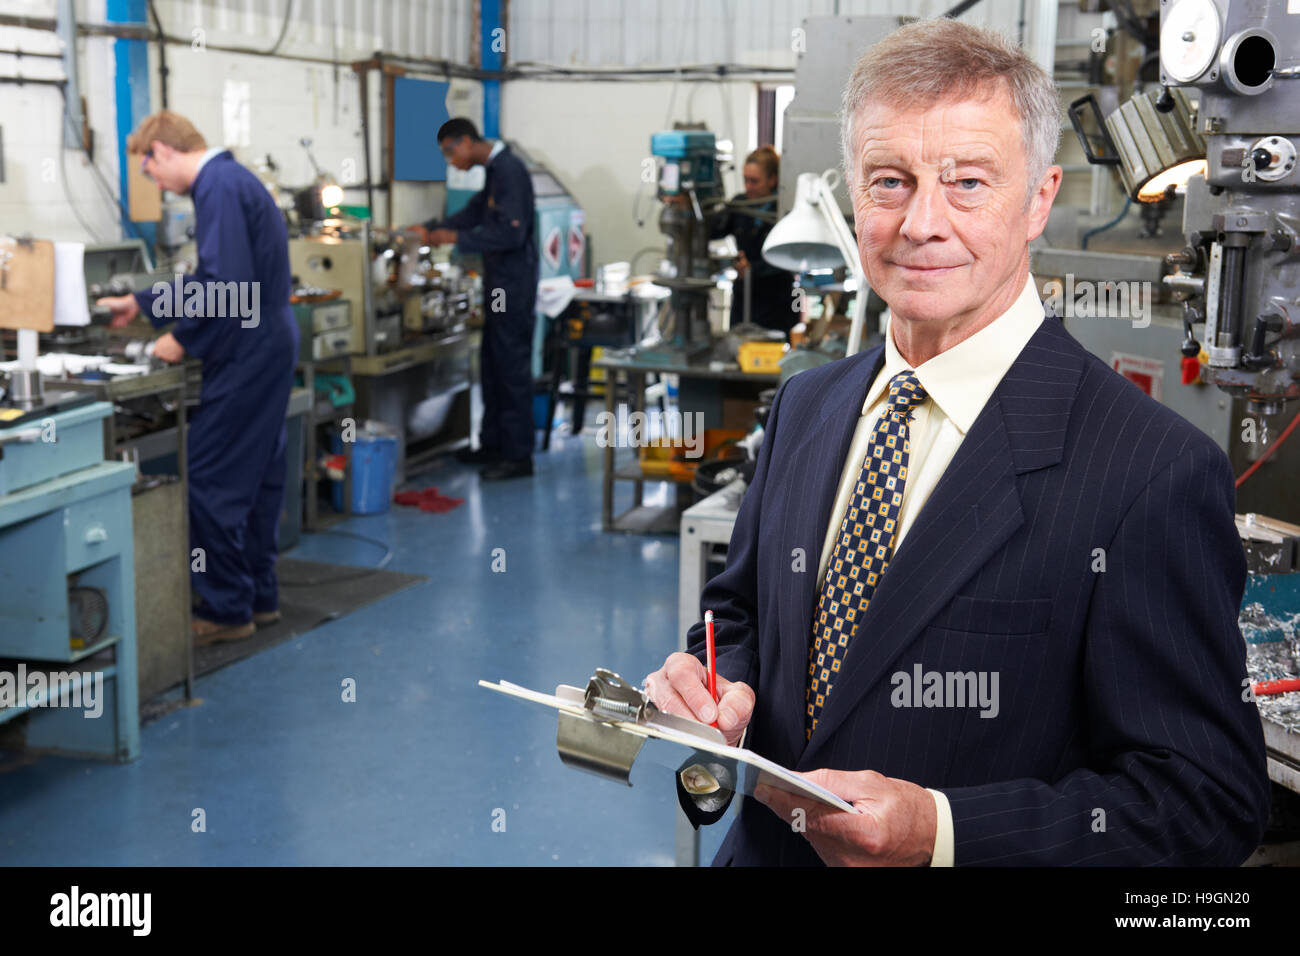 Owner Of Engineering Factory With Staff In Background Stock Photo